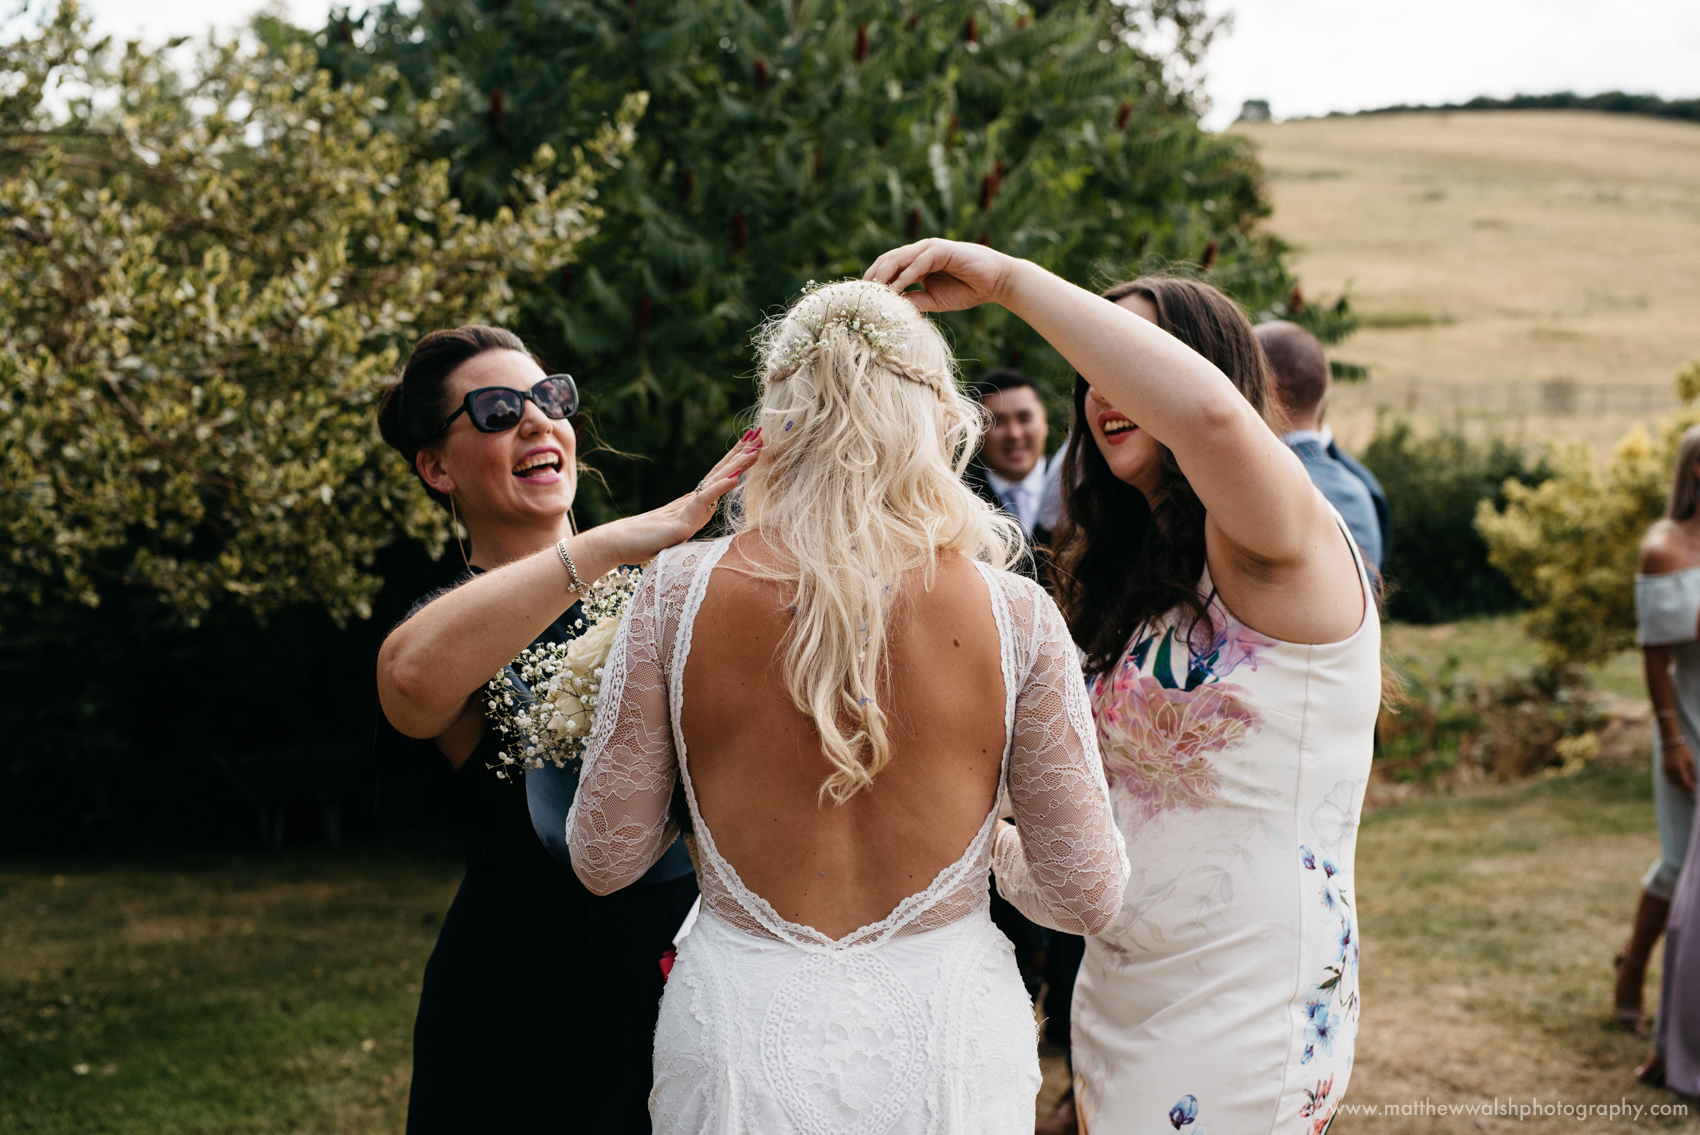 Friends of the bride help remove confetti from her hair